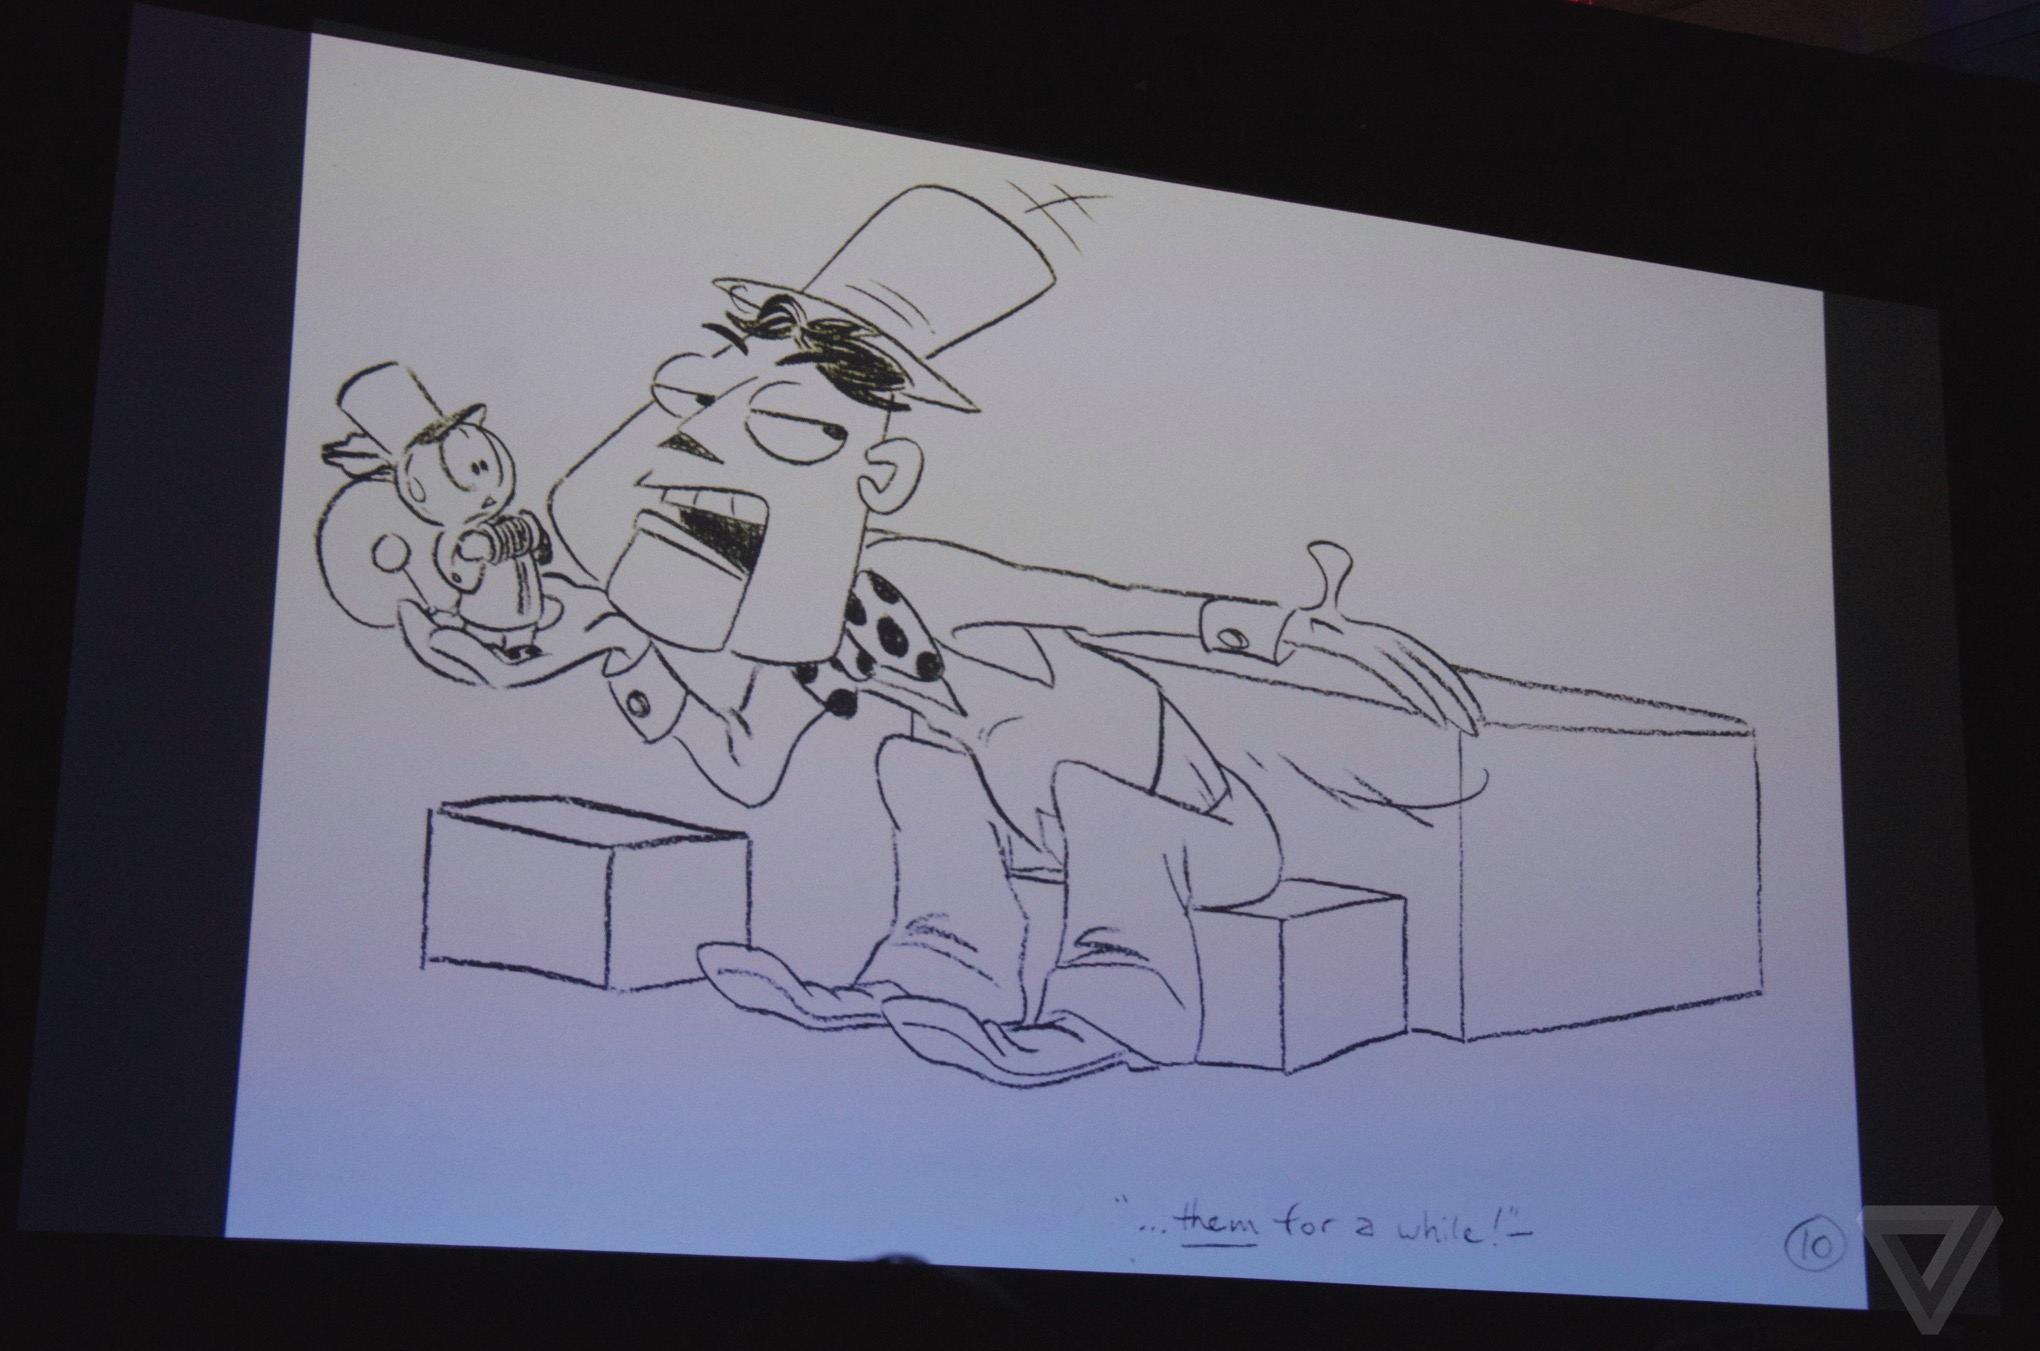 Toy Story SXSW panel images